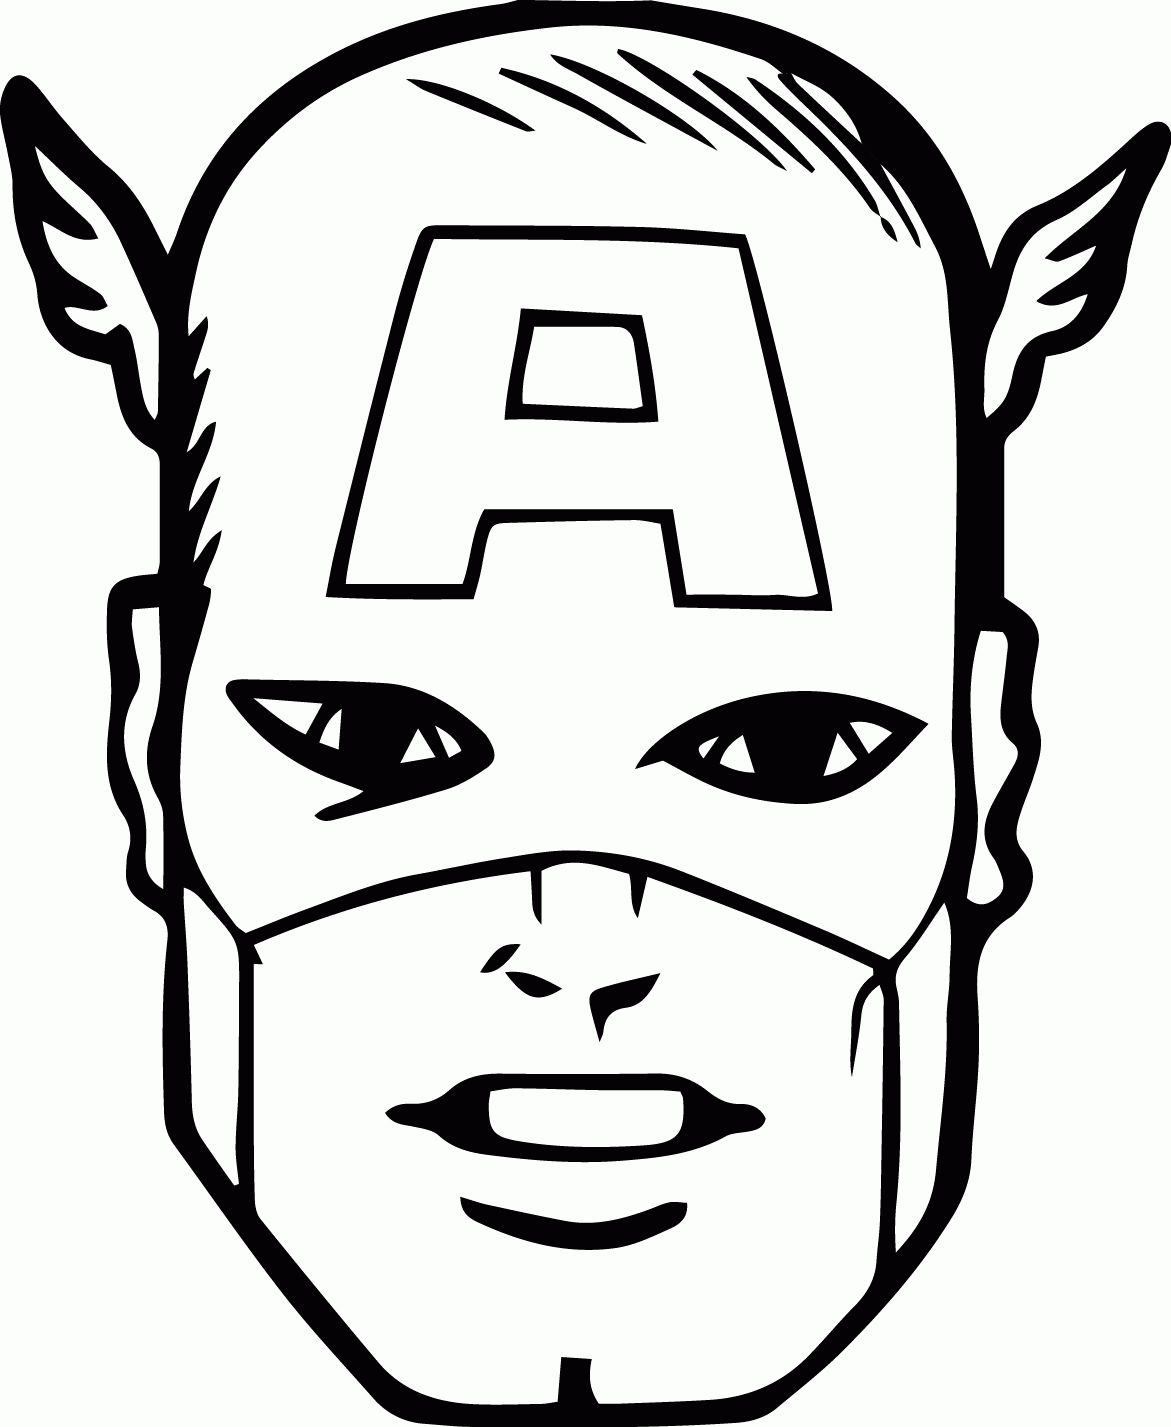 13 Pics of Captain America Face Coloring Pages - Captain America ...